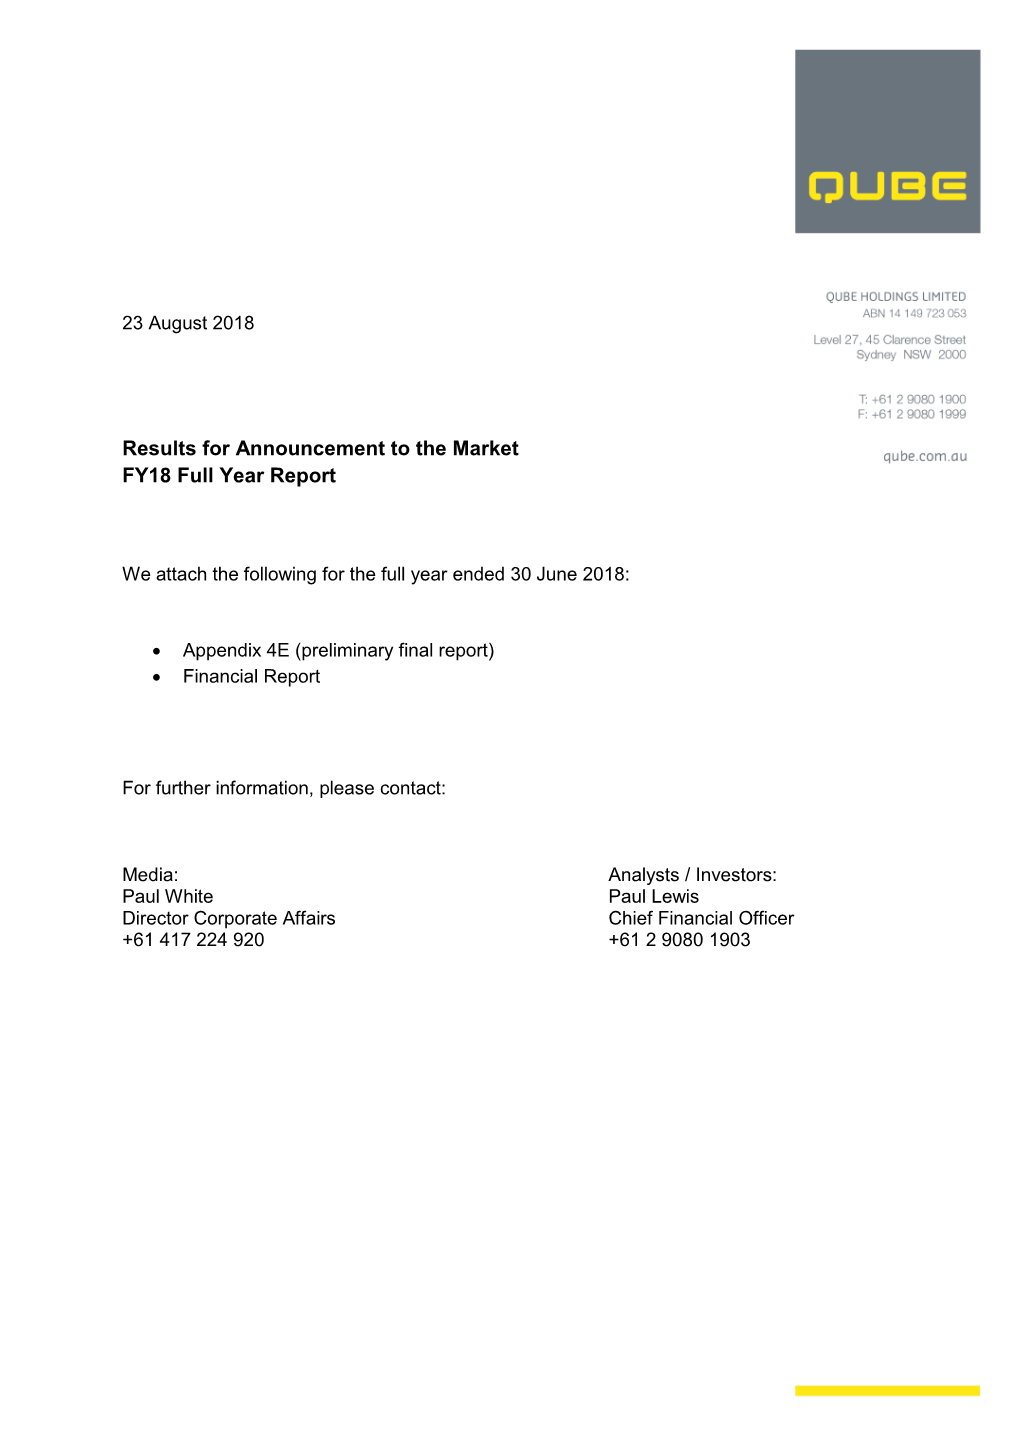 Results for Announcement to the Market FY18 Full Year Report